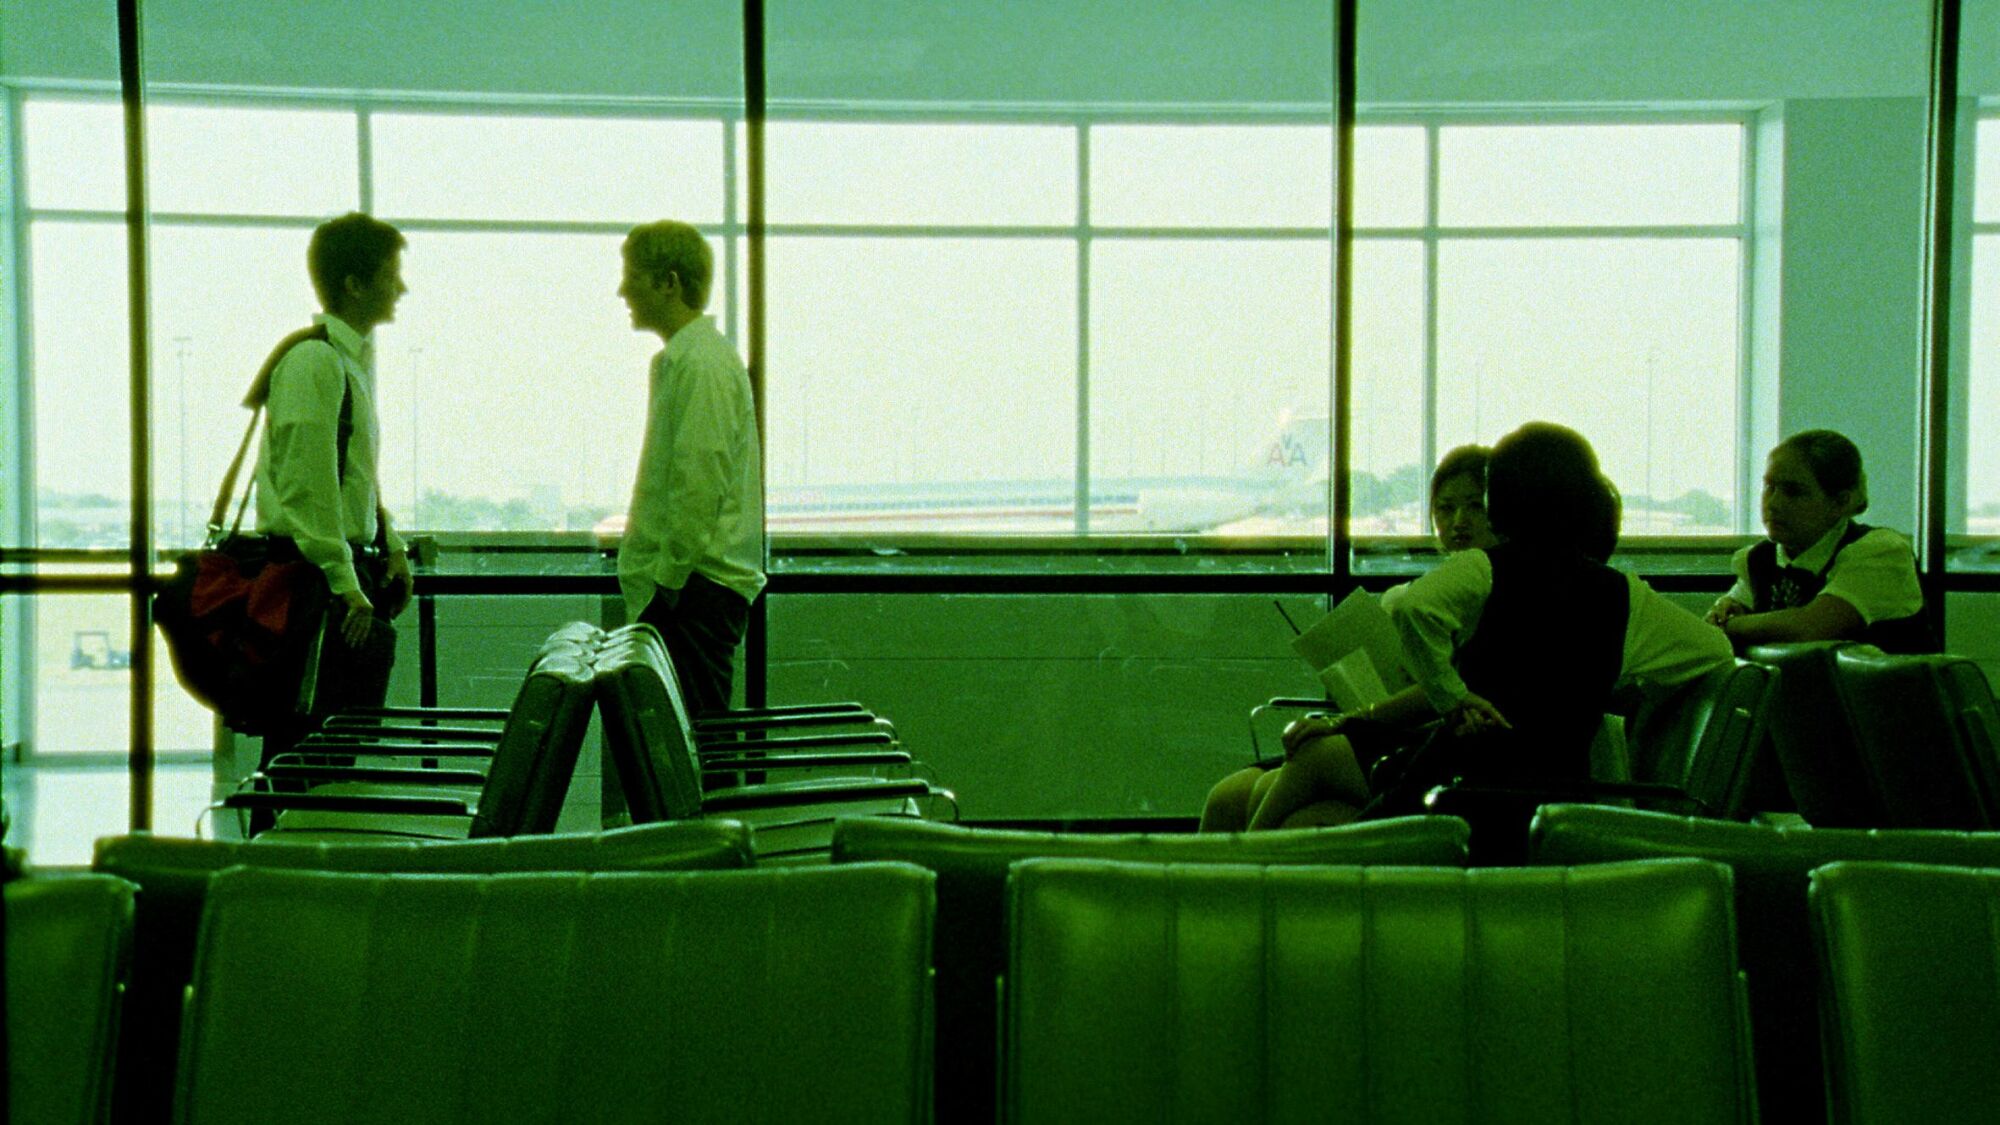 Two men stand on the left hand side of an airport scene, bathed in green light.